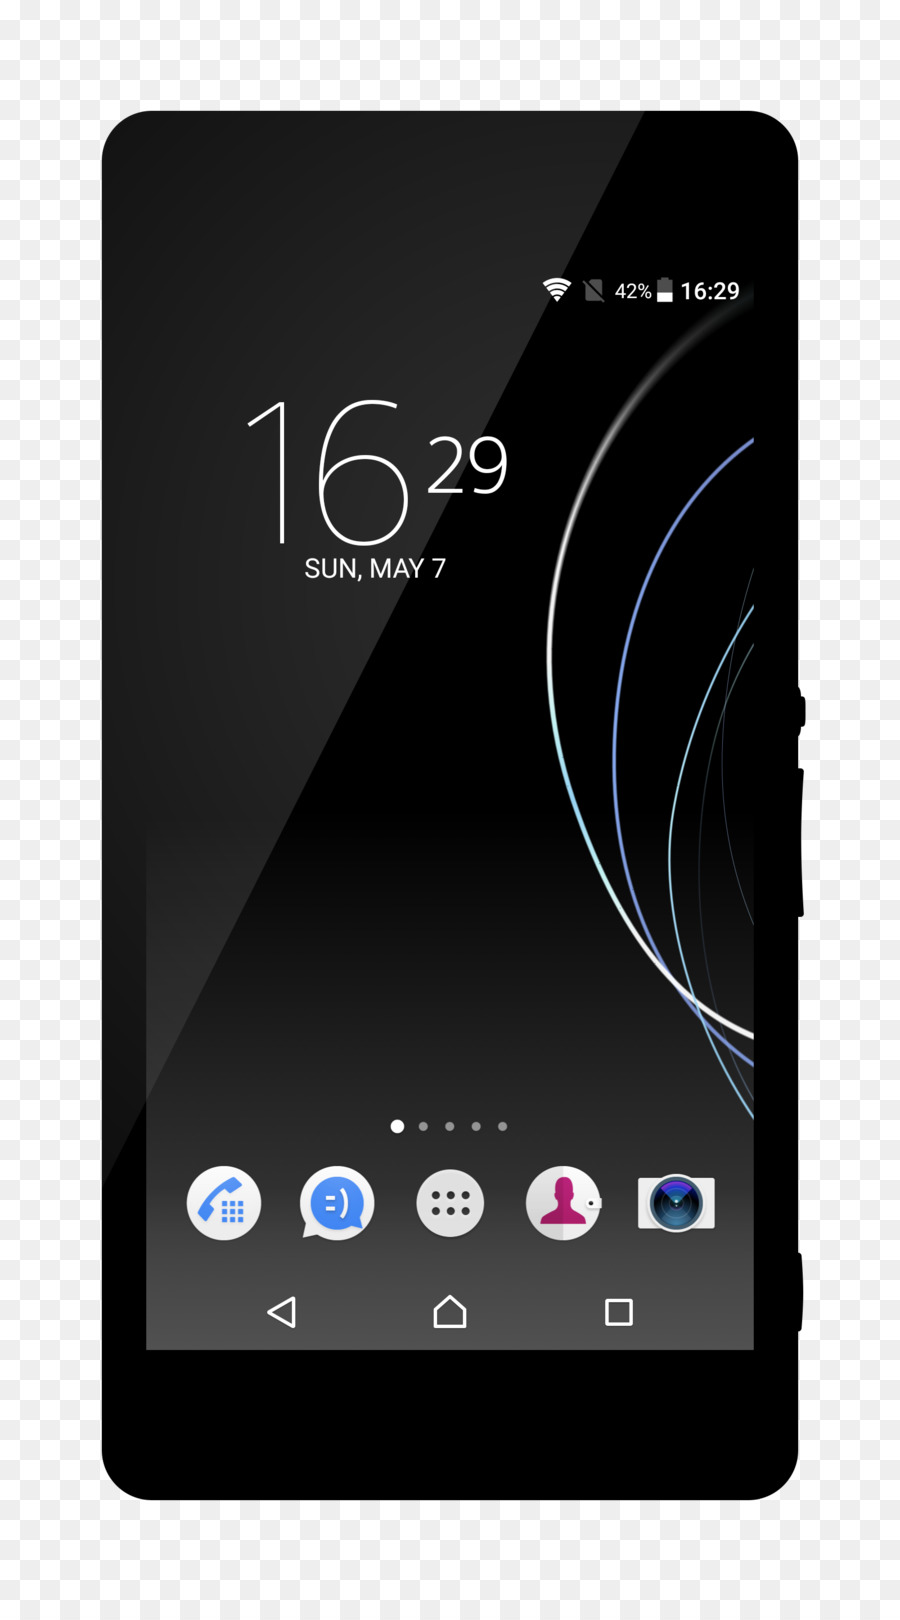 Smartphone，Sony Xperia Xzs PNG